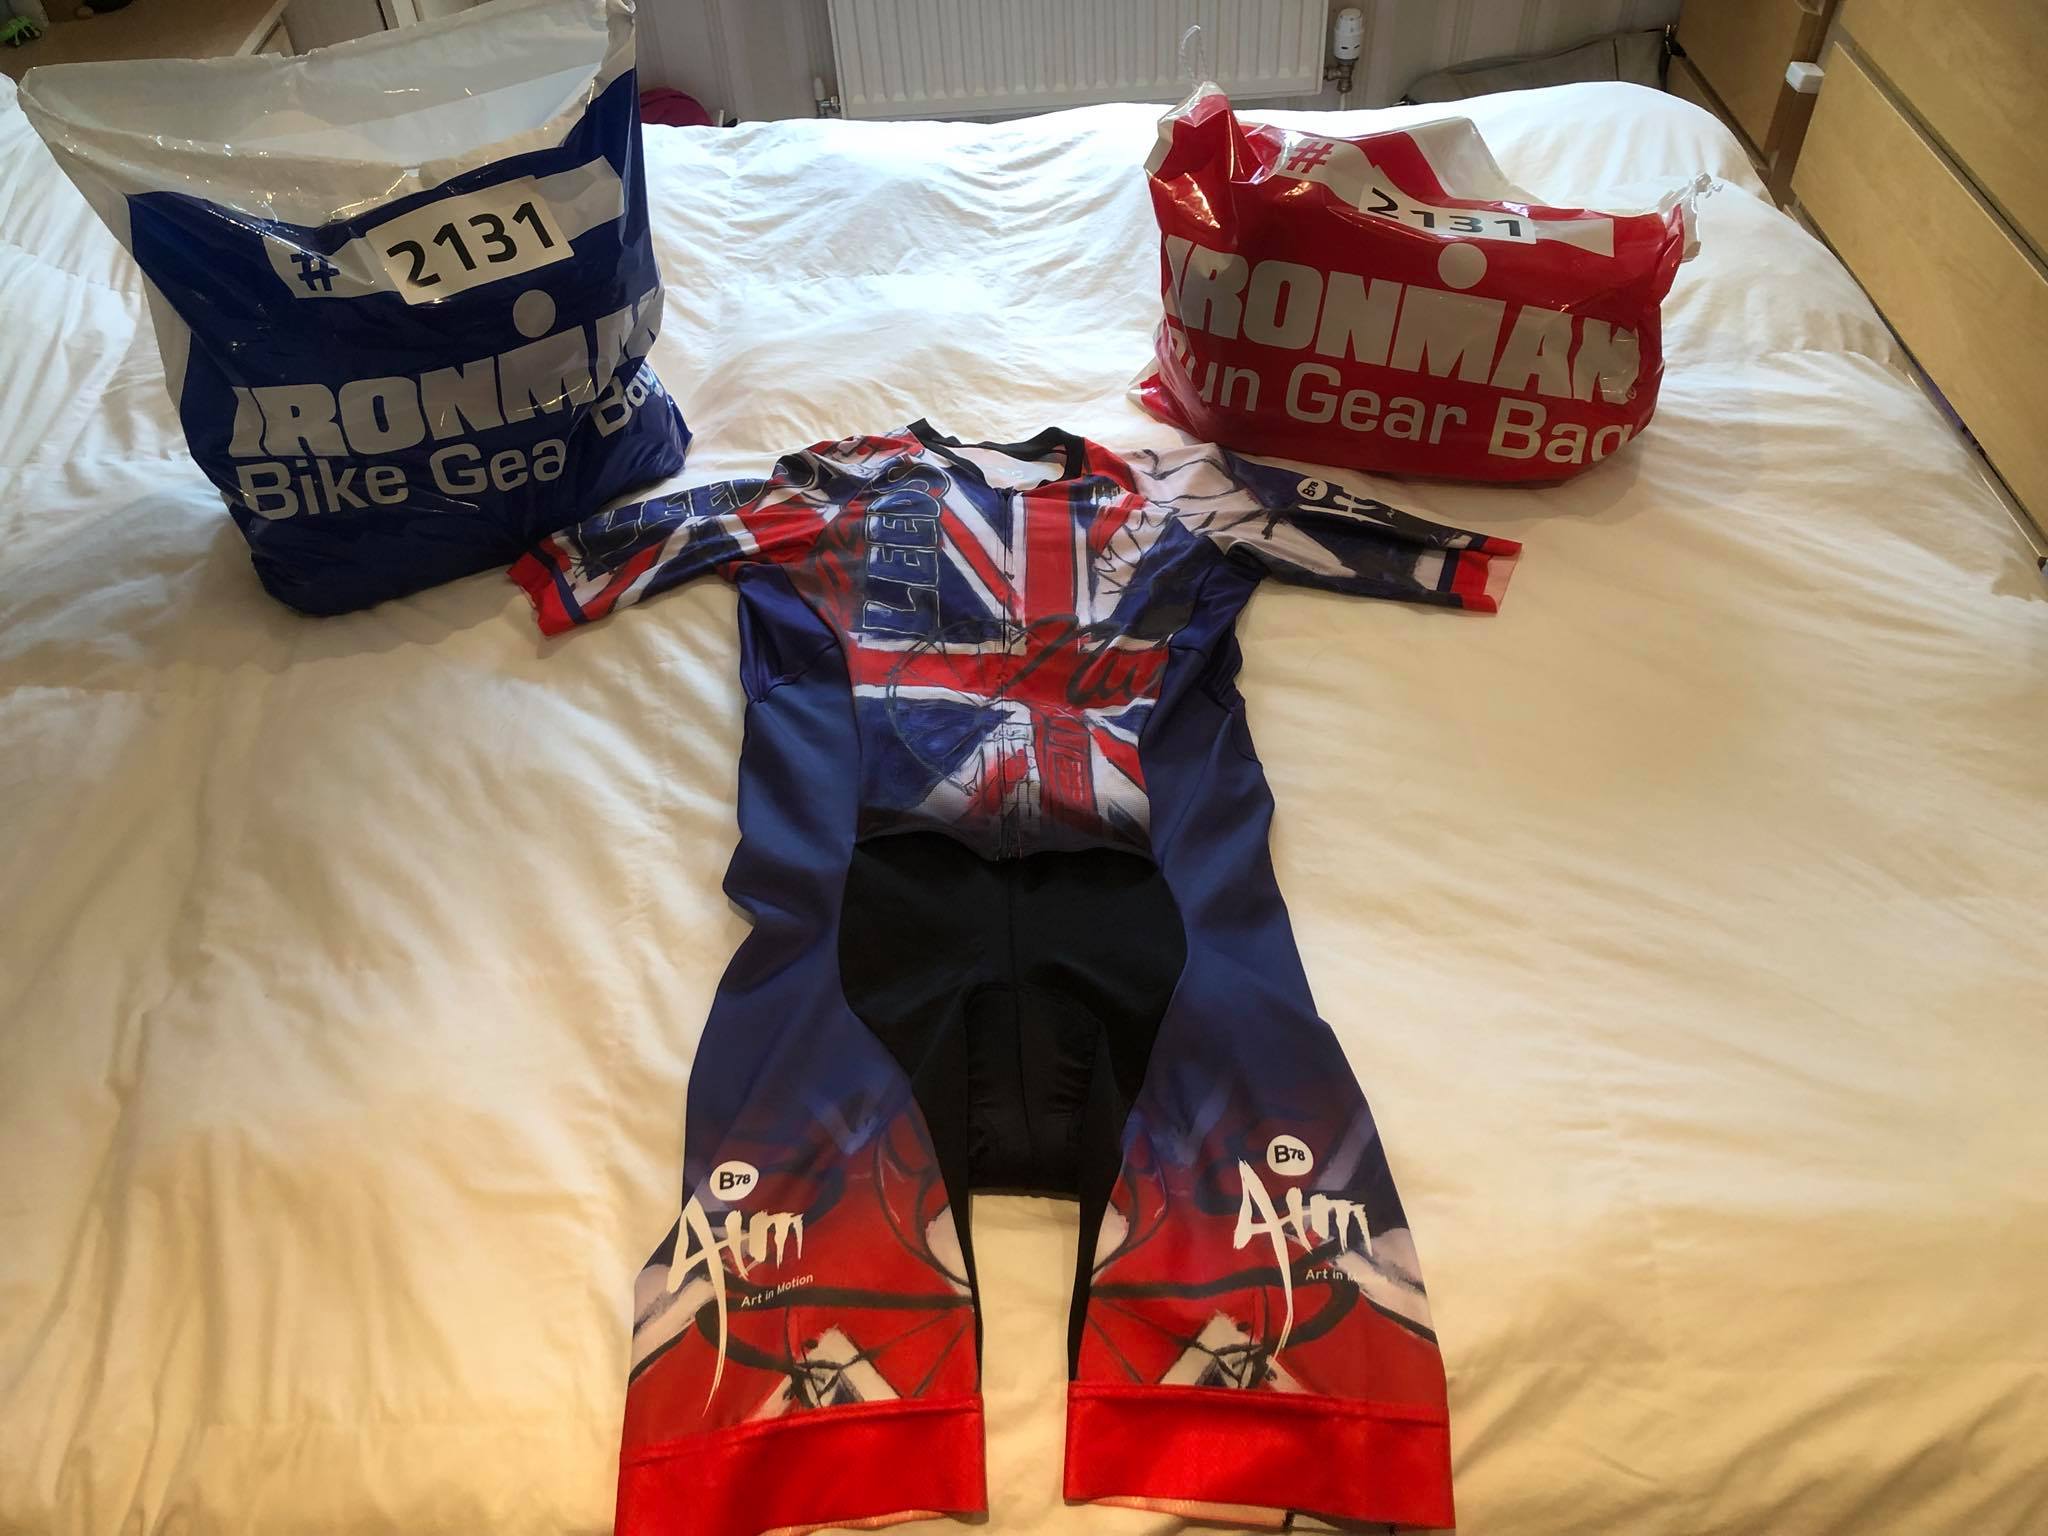 Coach_Terry_Wilson_Pursuit_of_The_Perfect_Race_IRONMAN_Bolton_United_Kingdom_Kevin_Nuun_Gear_2.jpg